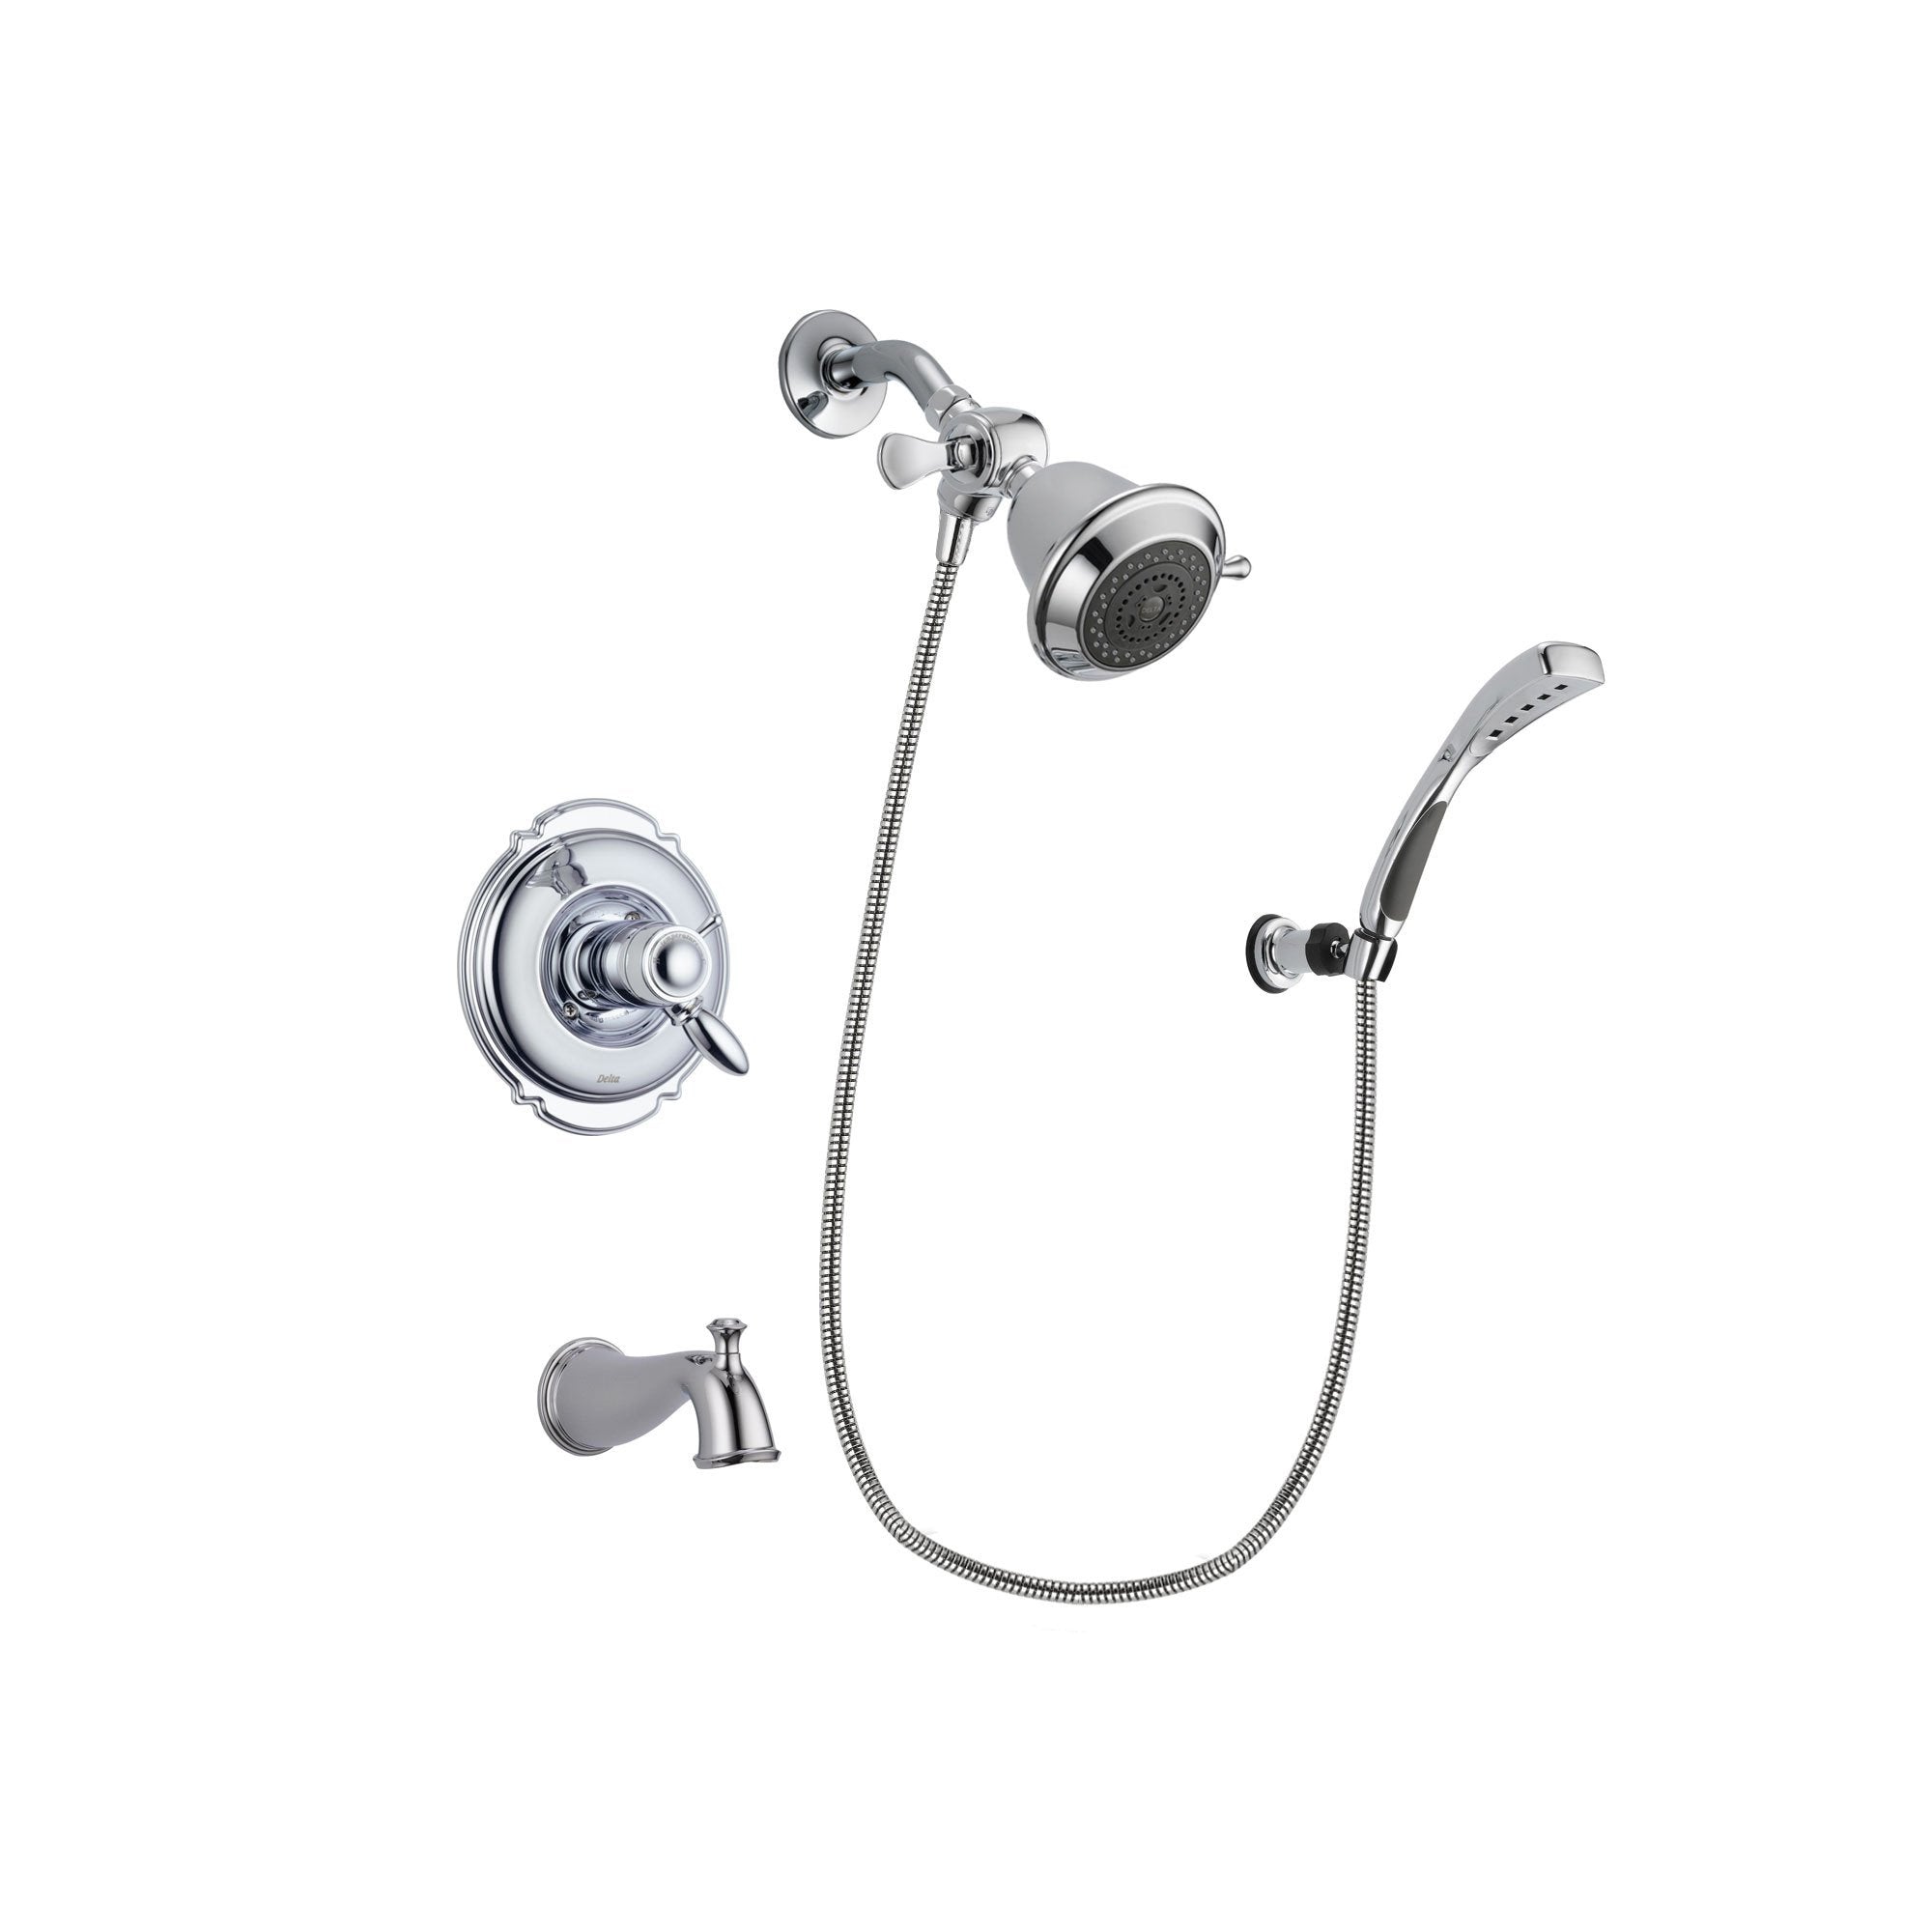 Delta Victorian Chrome Finish Thermostatic Tub and Shower Faucet System Package with Shower Head and Wall-Mount Bracket with Handheld Shower Spray Includes Rough-in Valve and Tub Spout DSP0971V